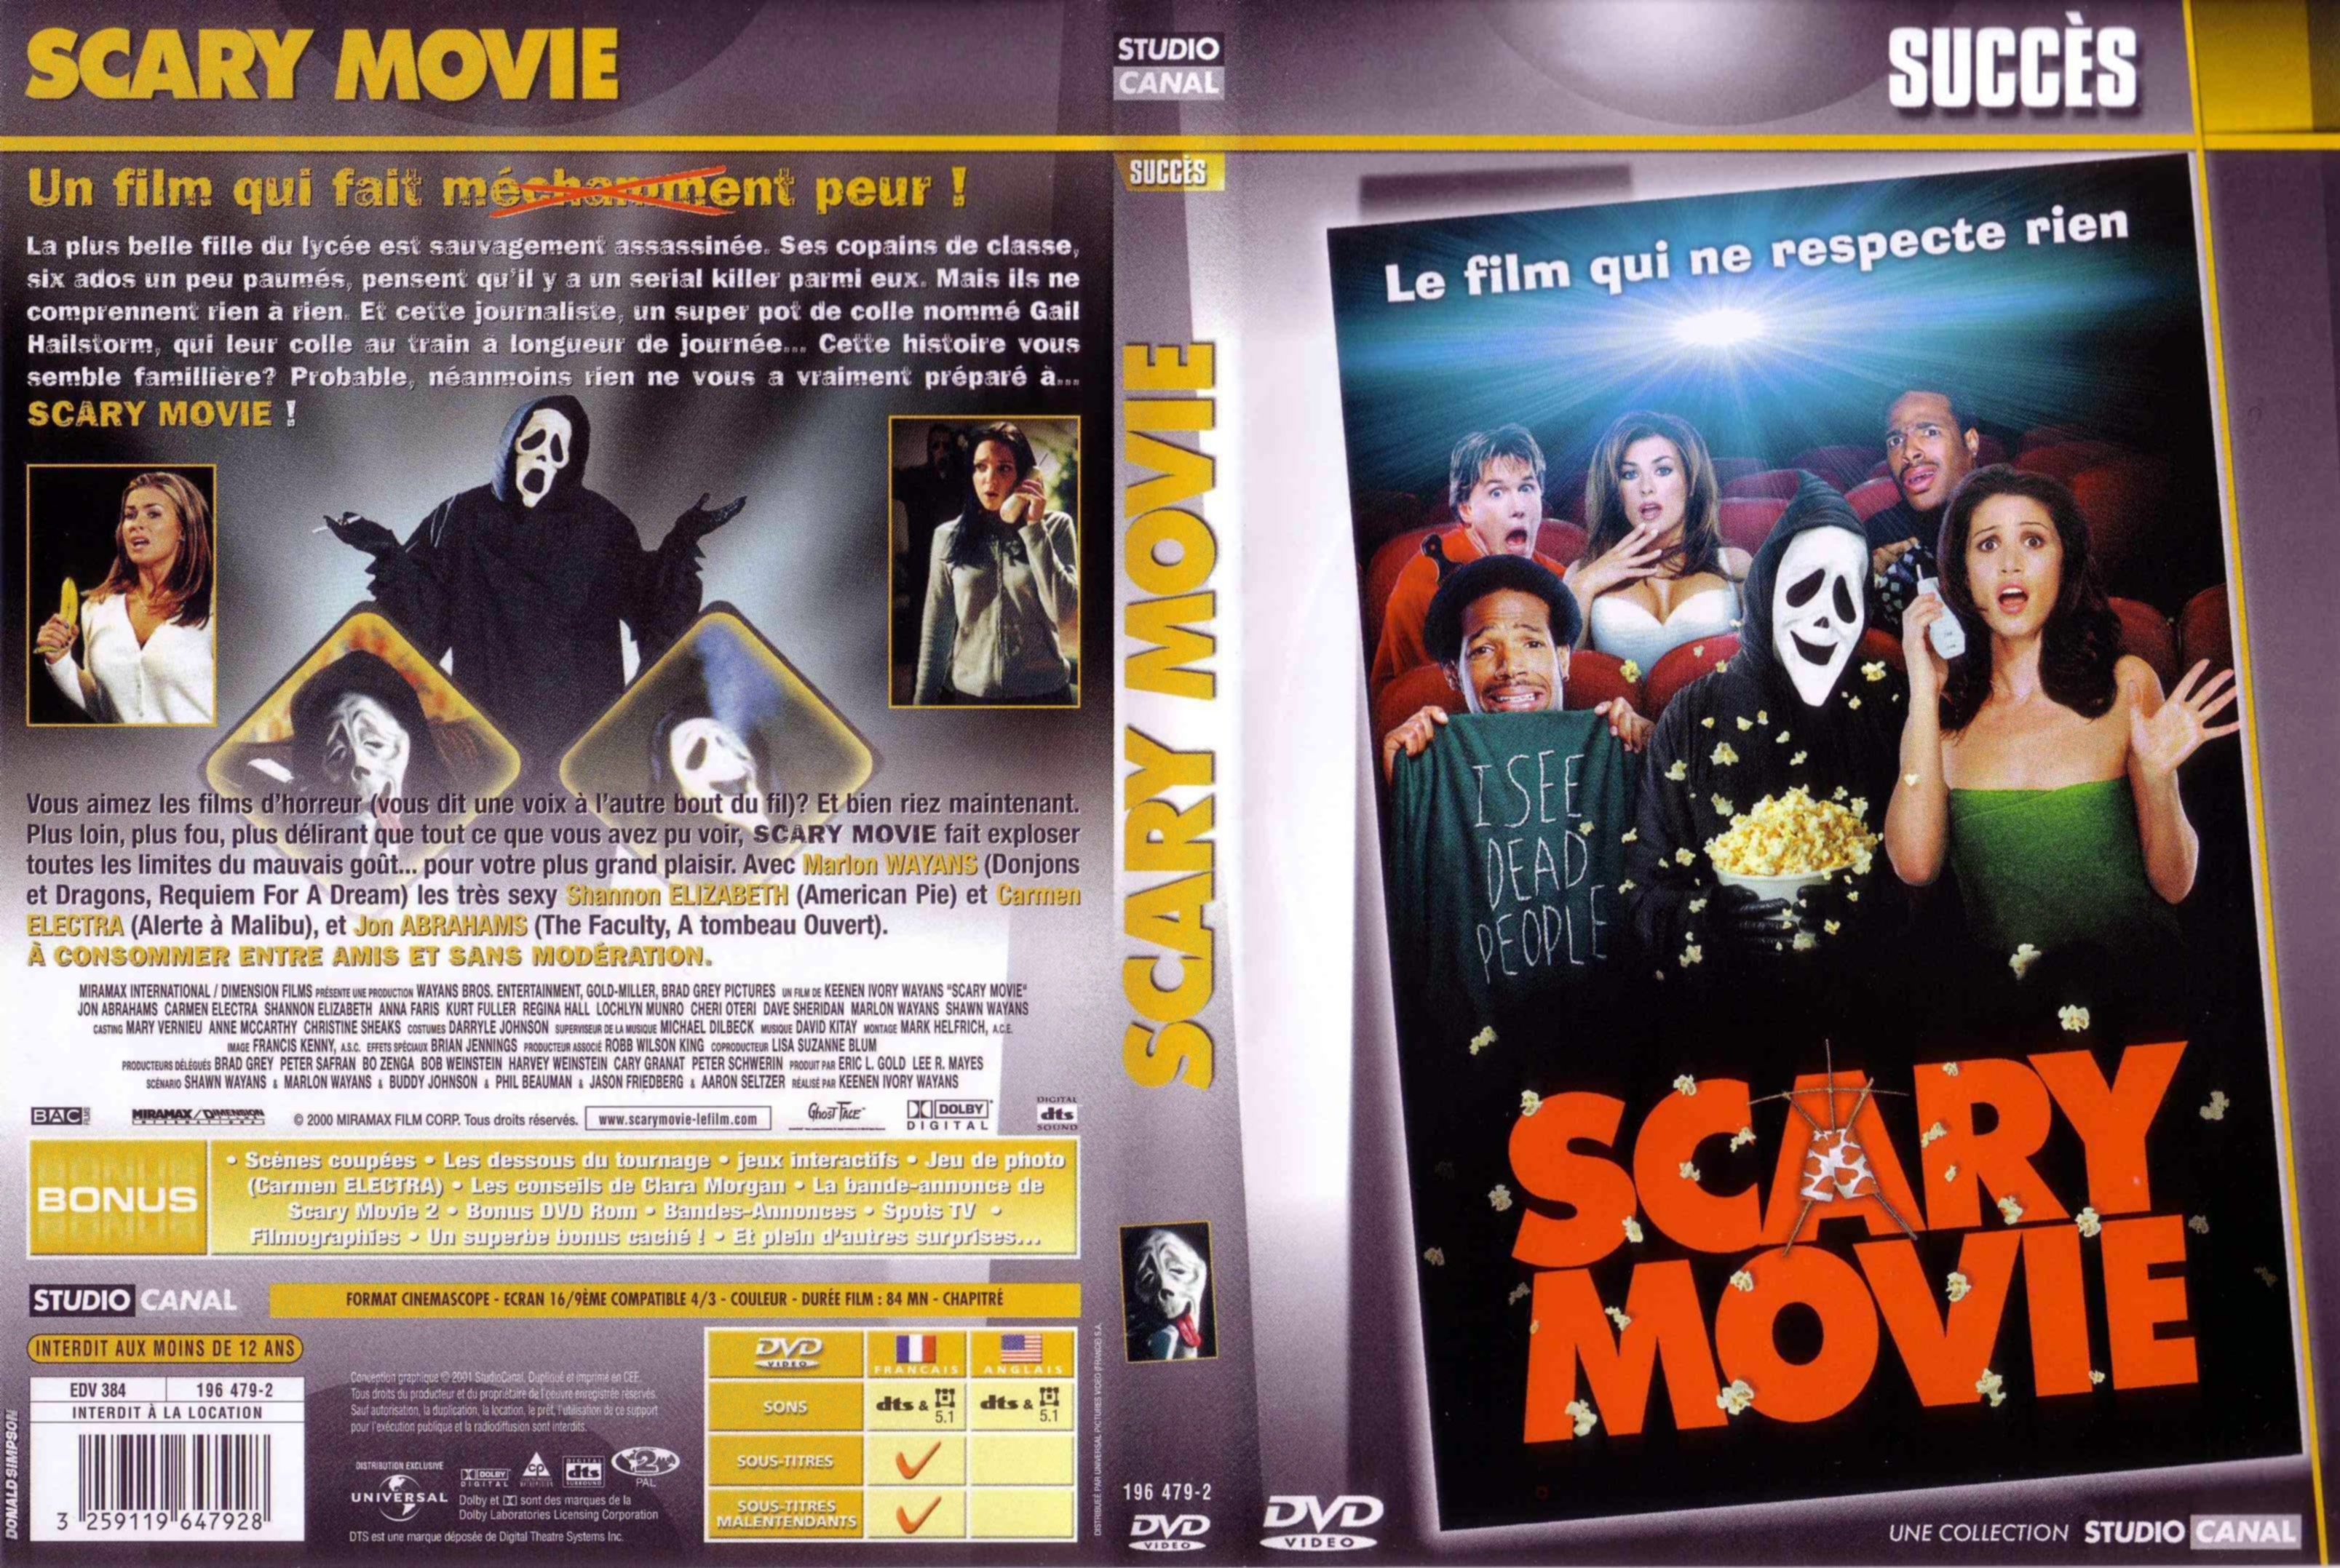 Jaquette DVD Scary movie